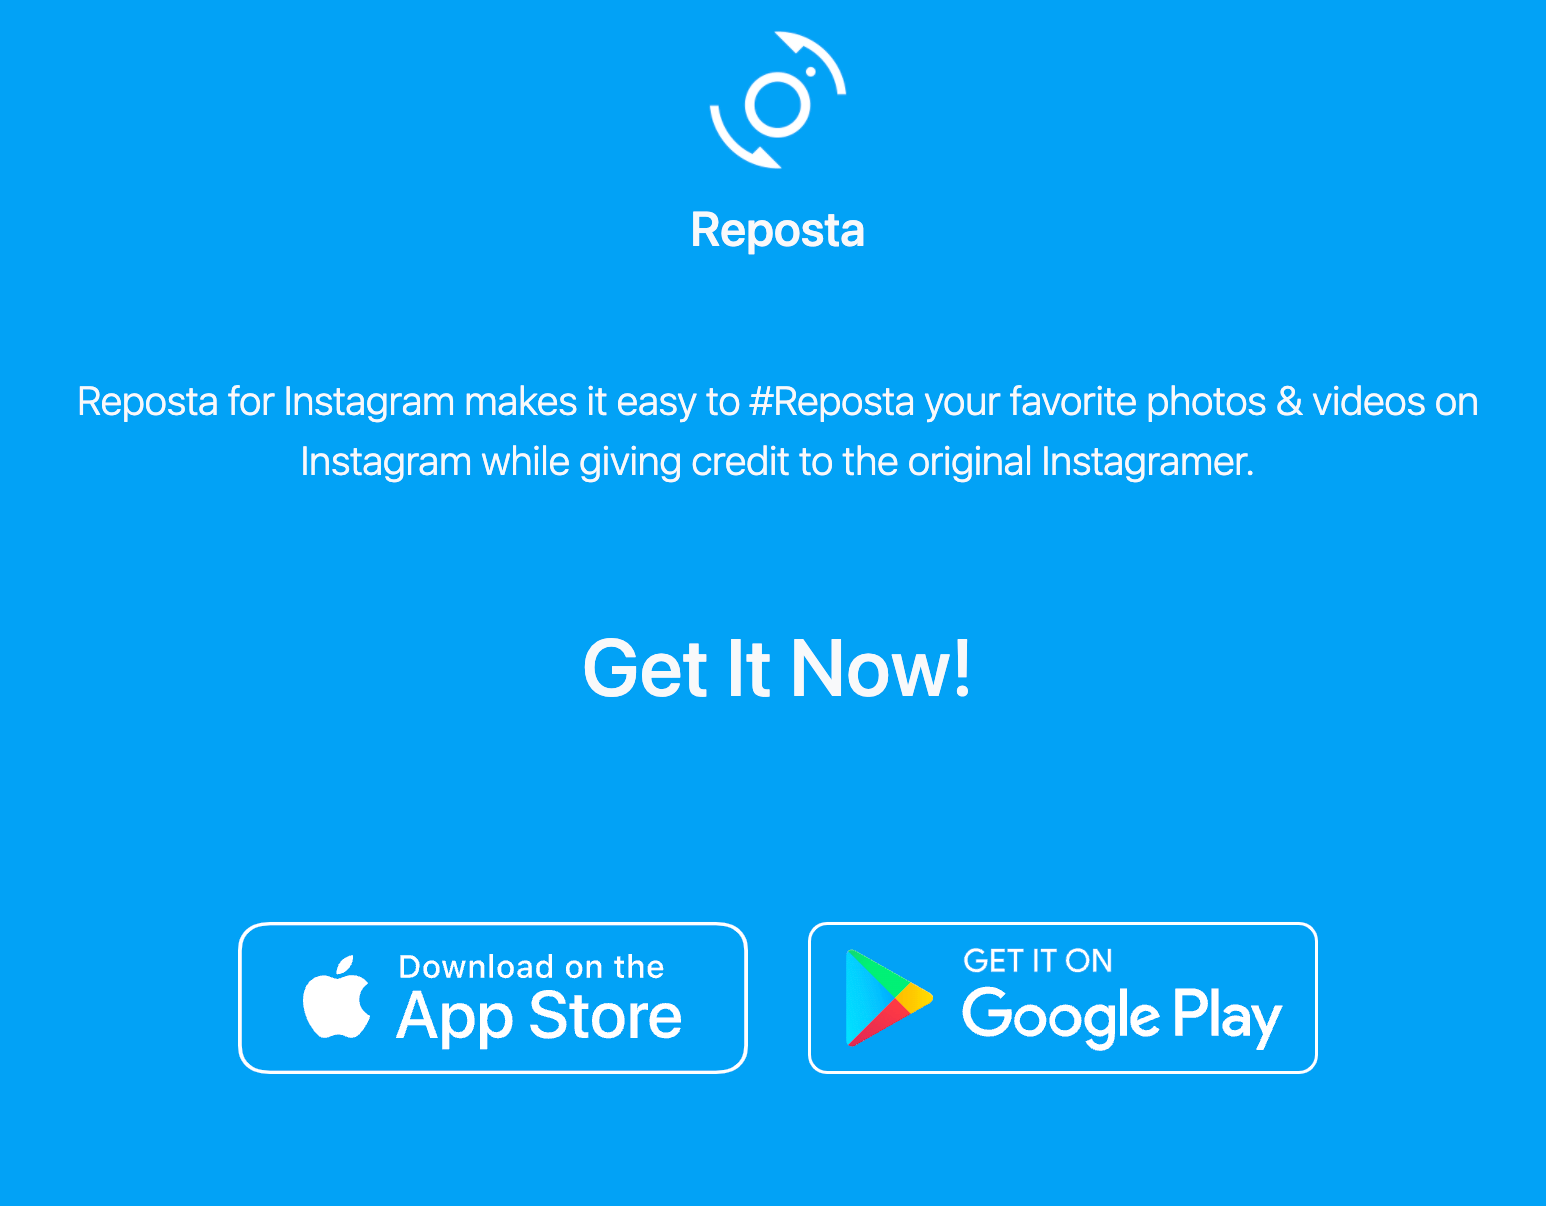 The Reposta app download page